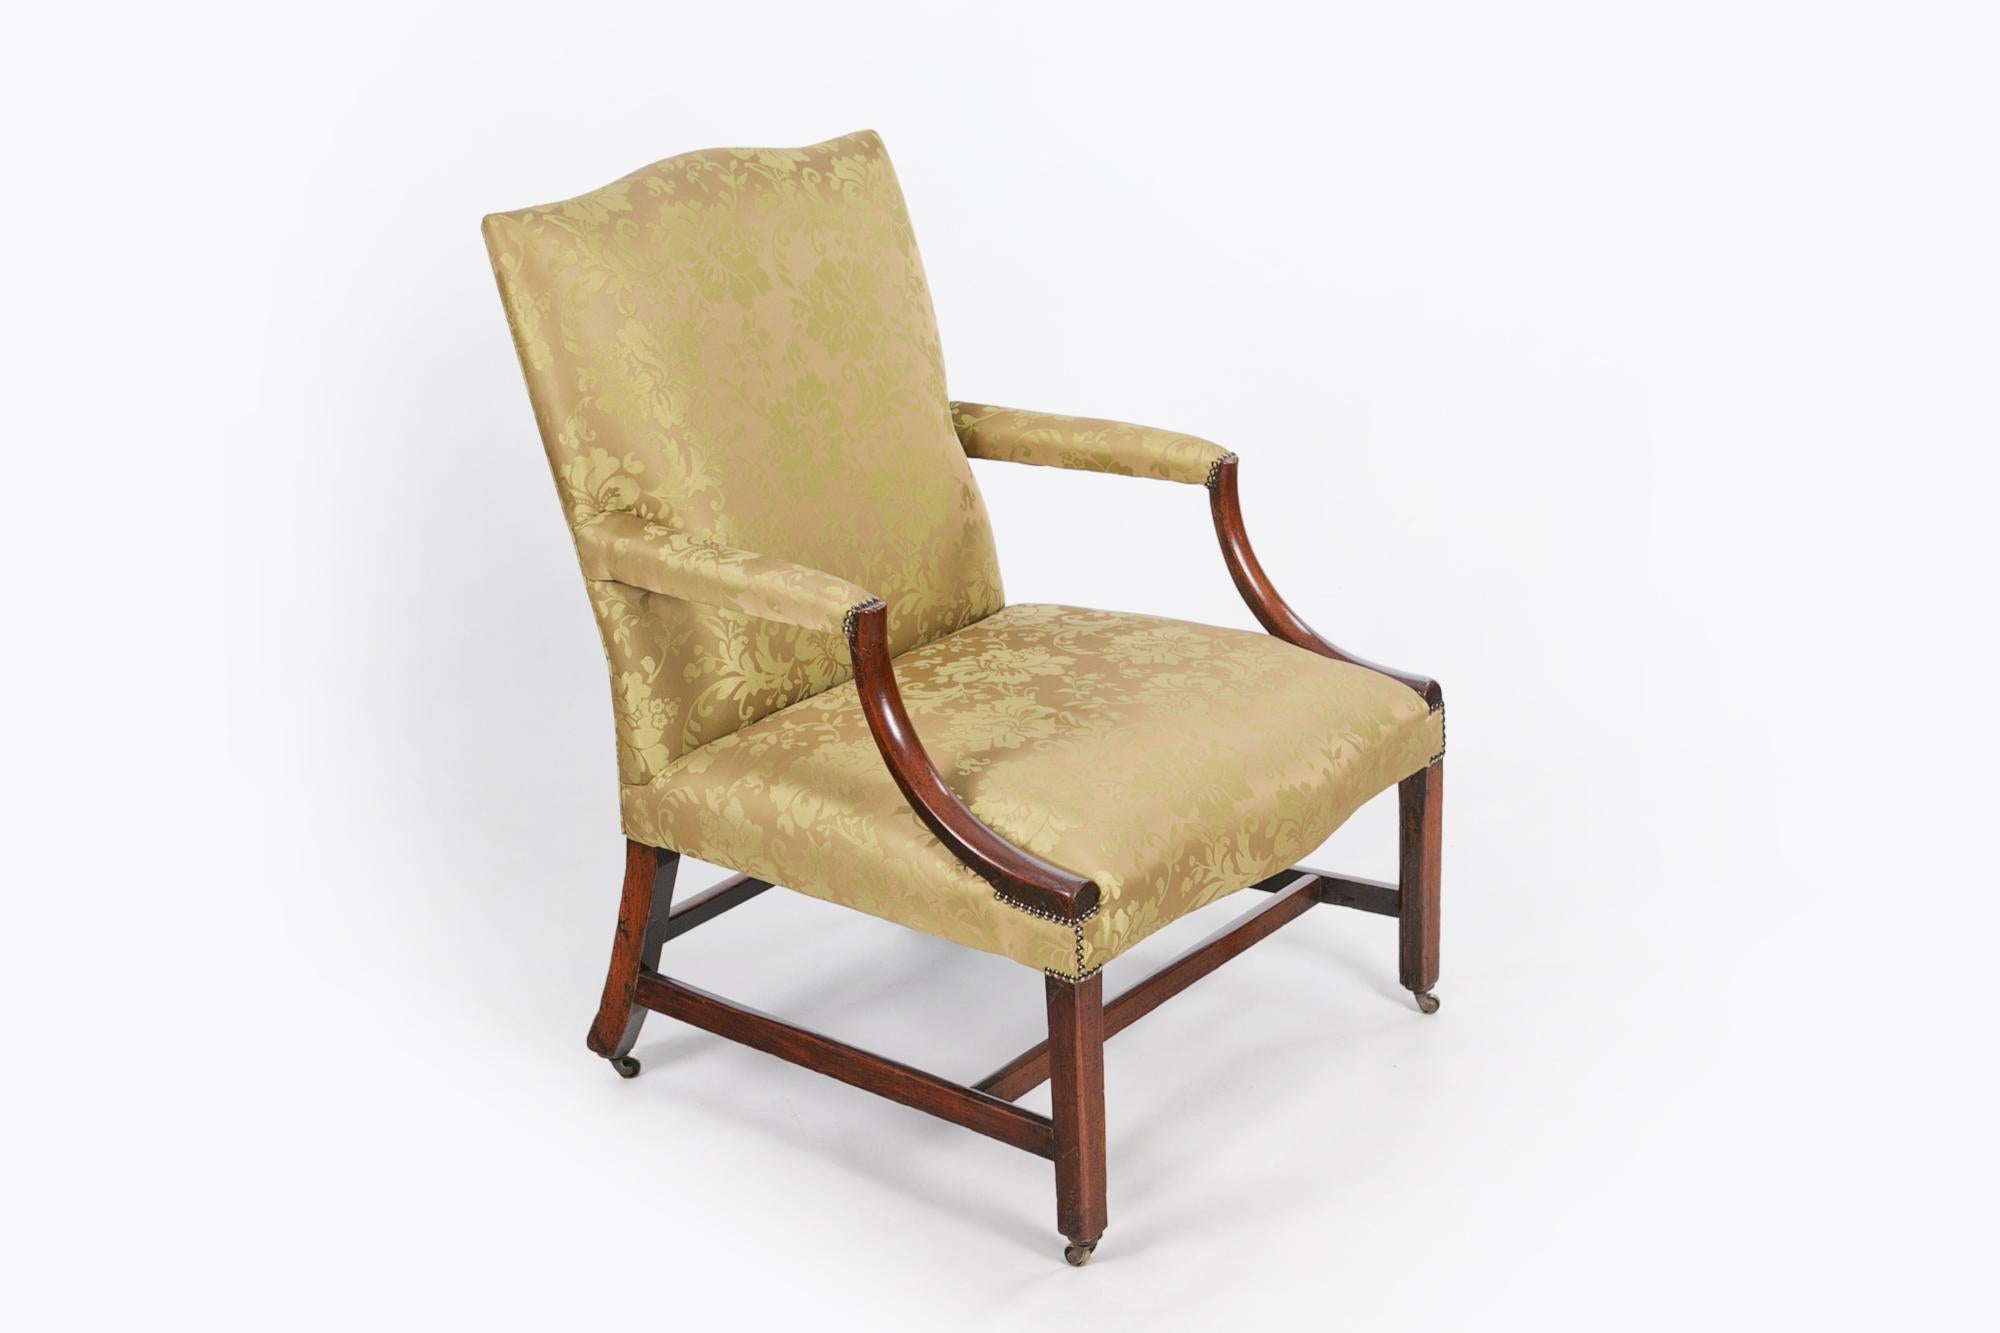 Early 19th century Gainsborough mahogany armchair in the manner of Chippendale, upholstered in sage green silk damask in the traditional 19th century style with brass studding, the shaped padded back above padded arms with down swept arm supports